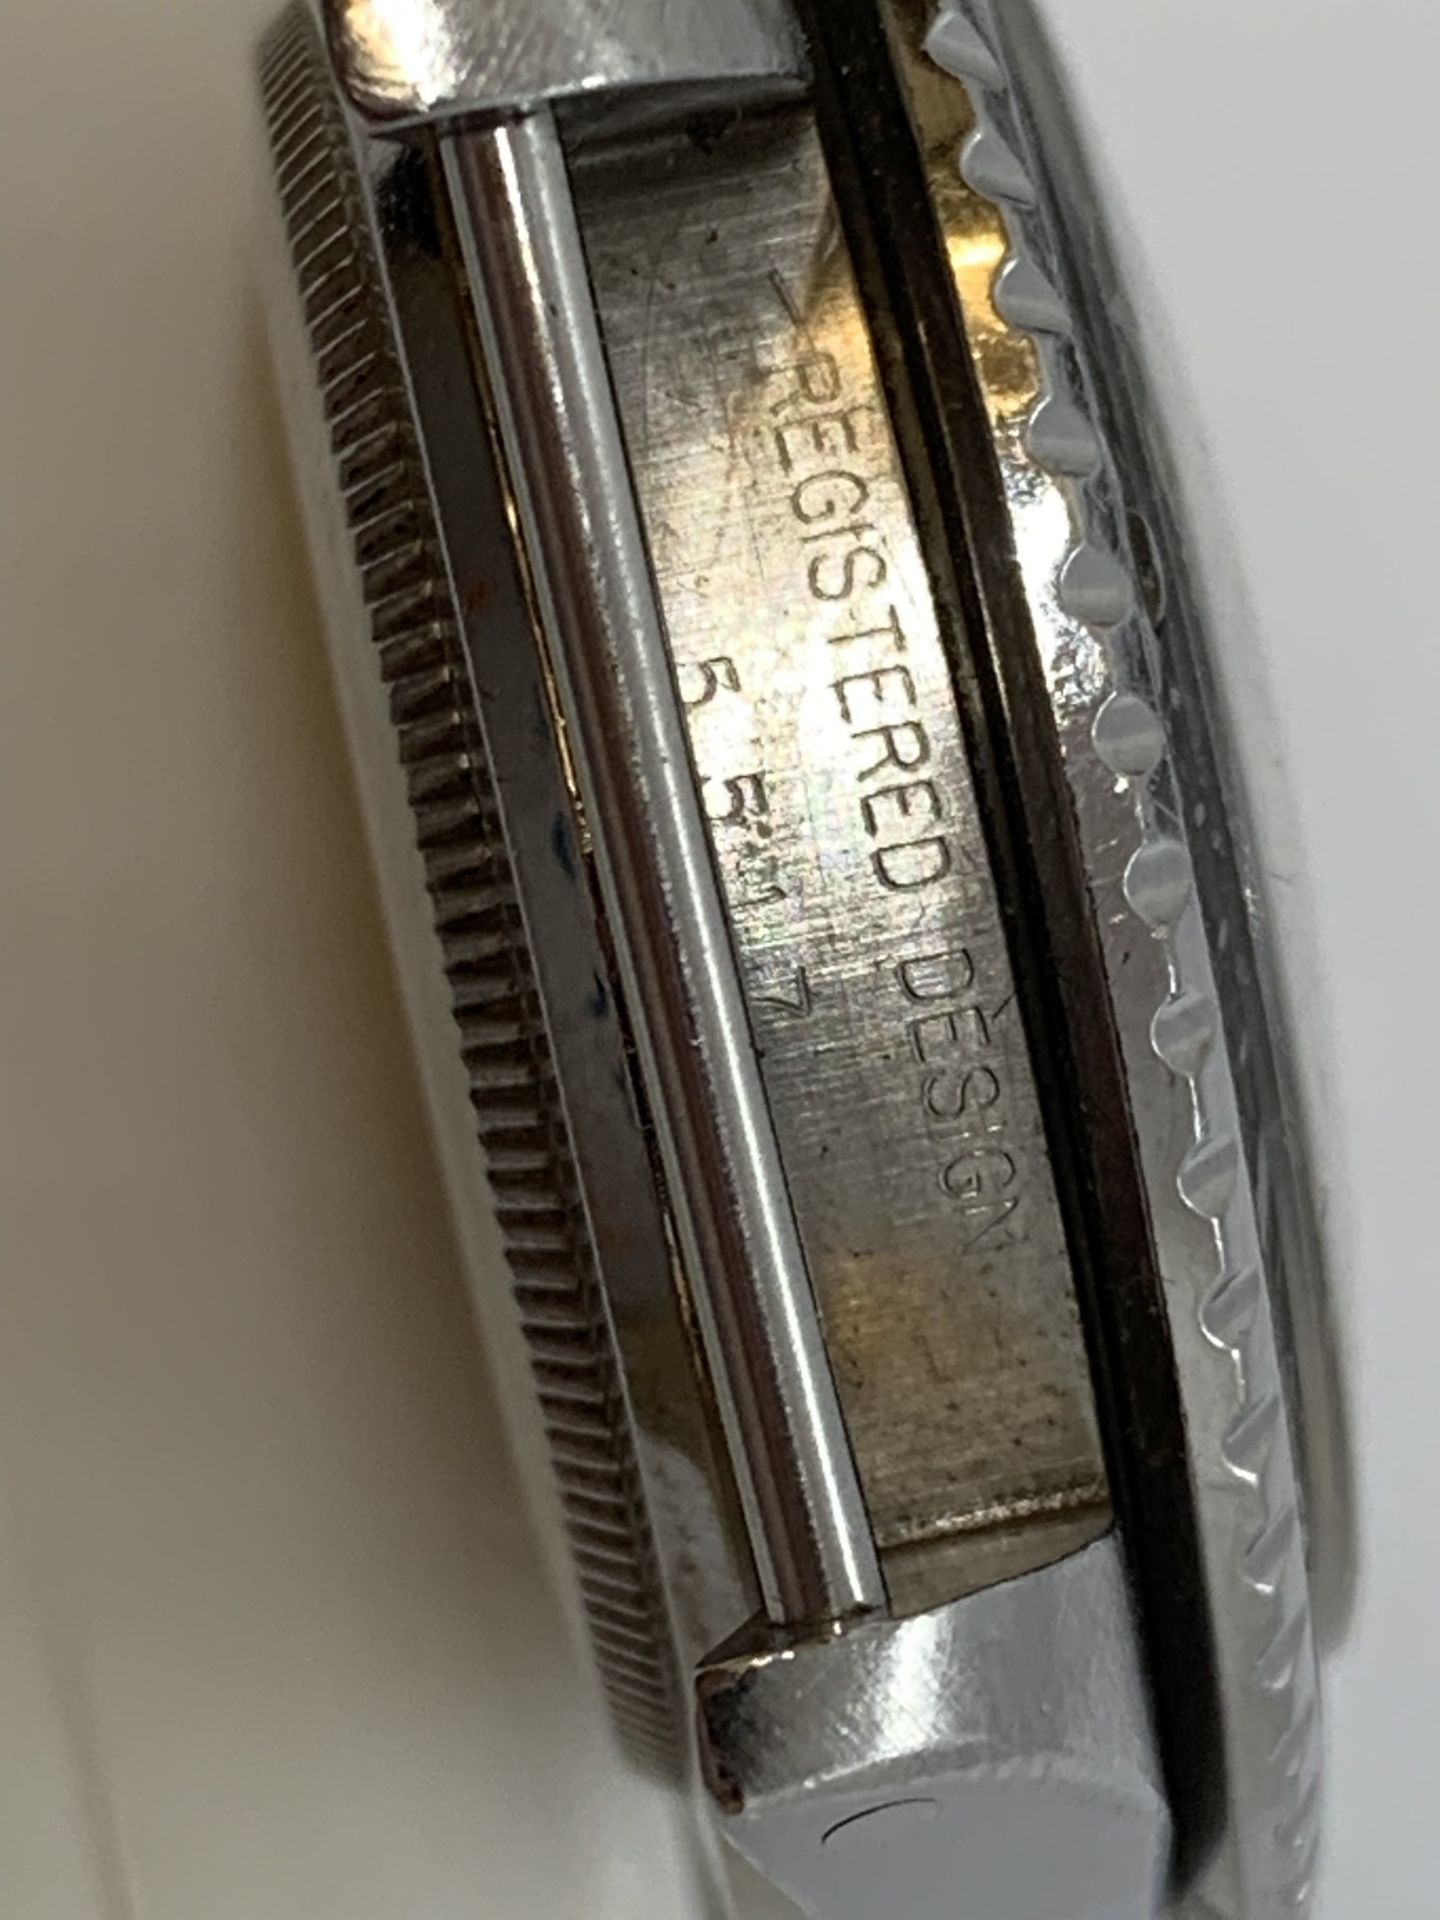 WATCH MARKED "ROLEX" - ONLY MOVEMENT AUTHENTICATED AS ROLEX - Image 10 of 15